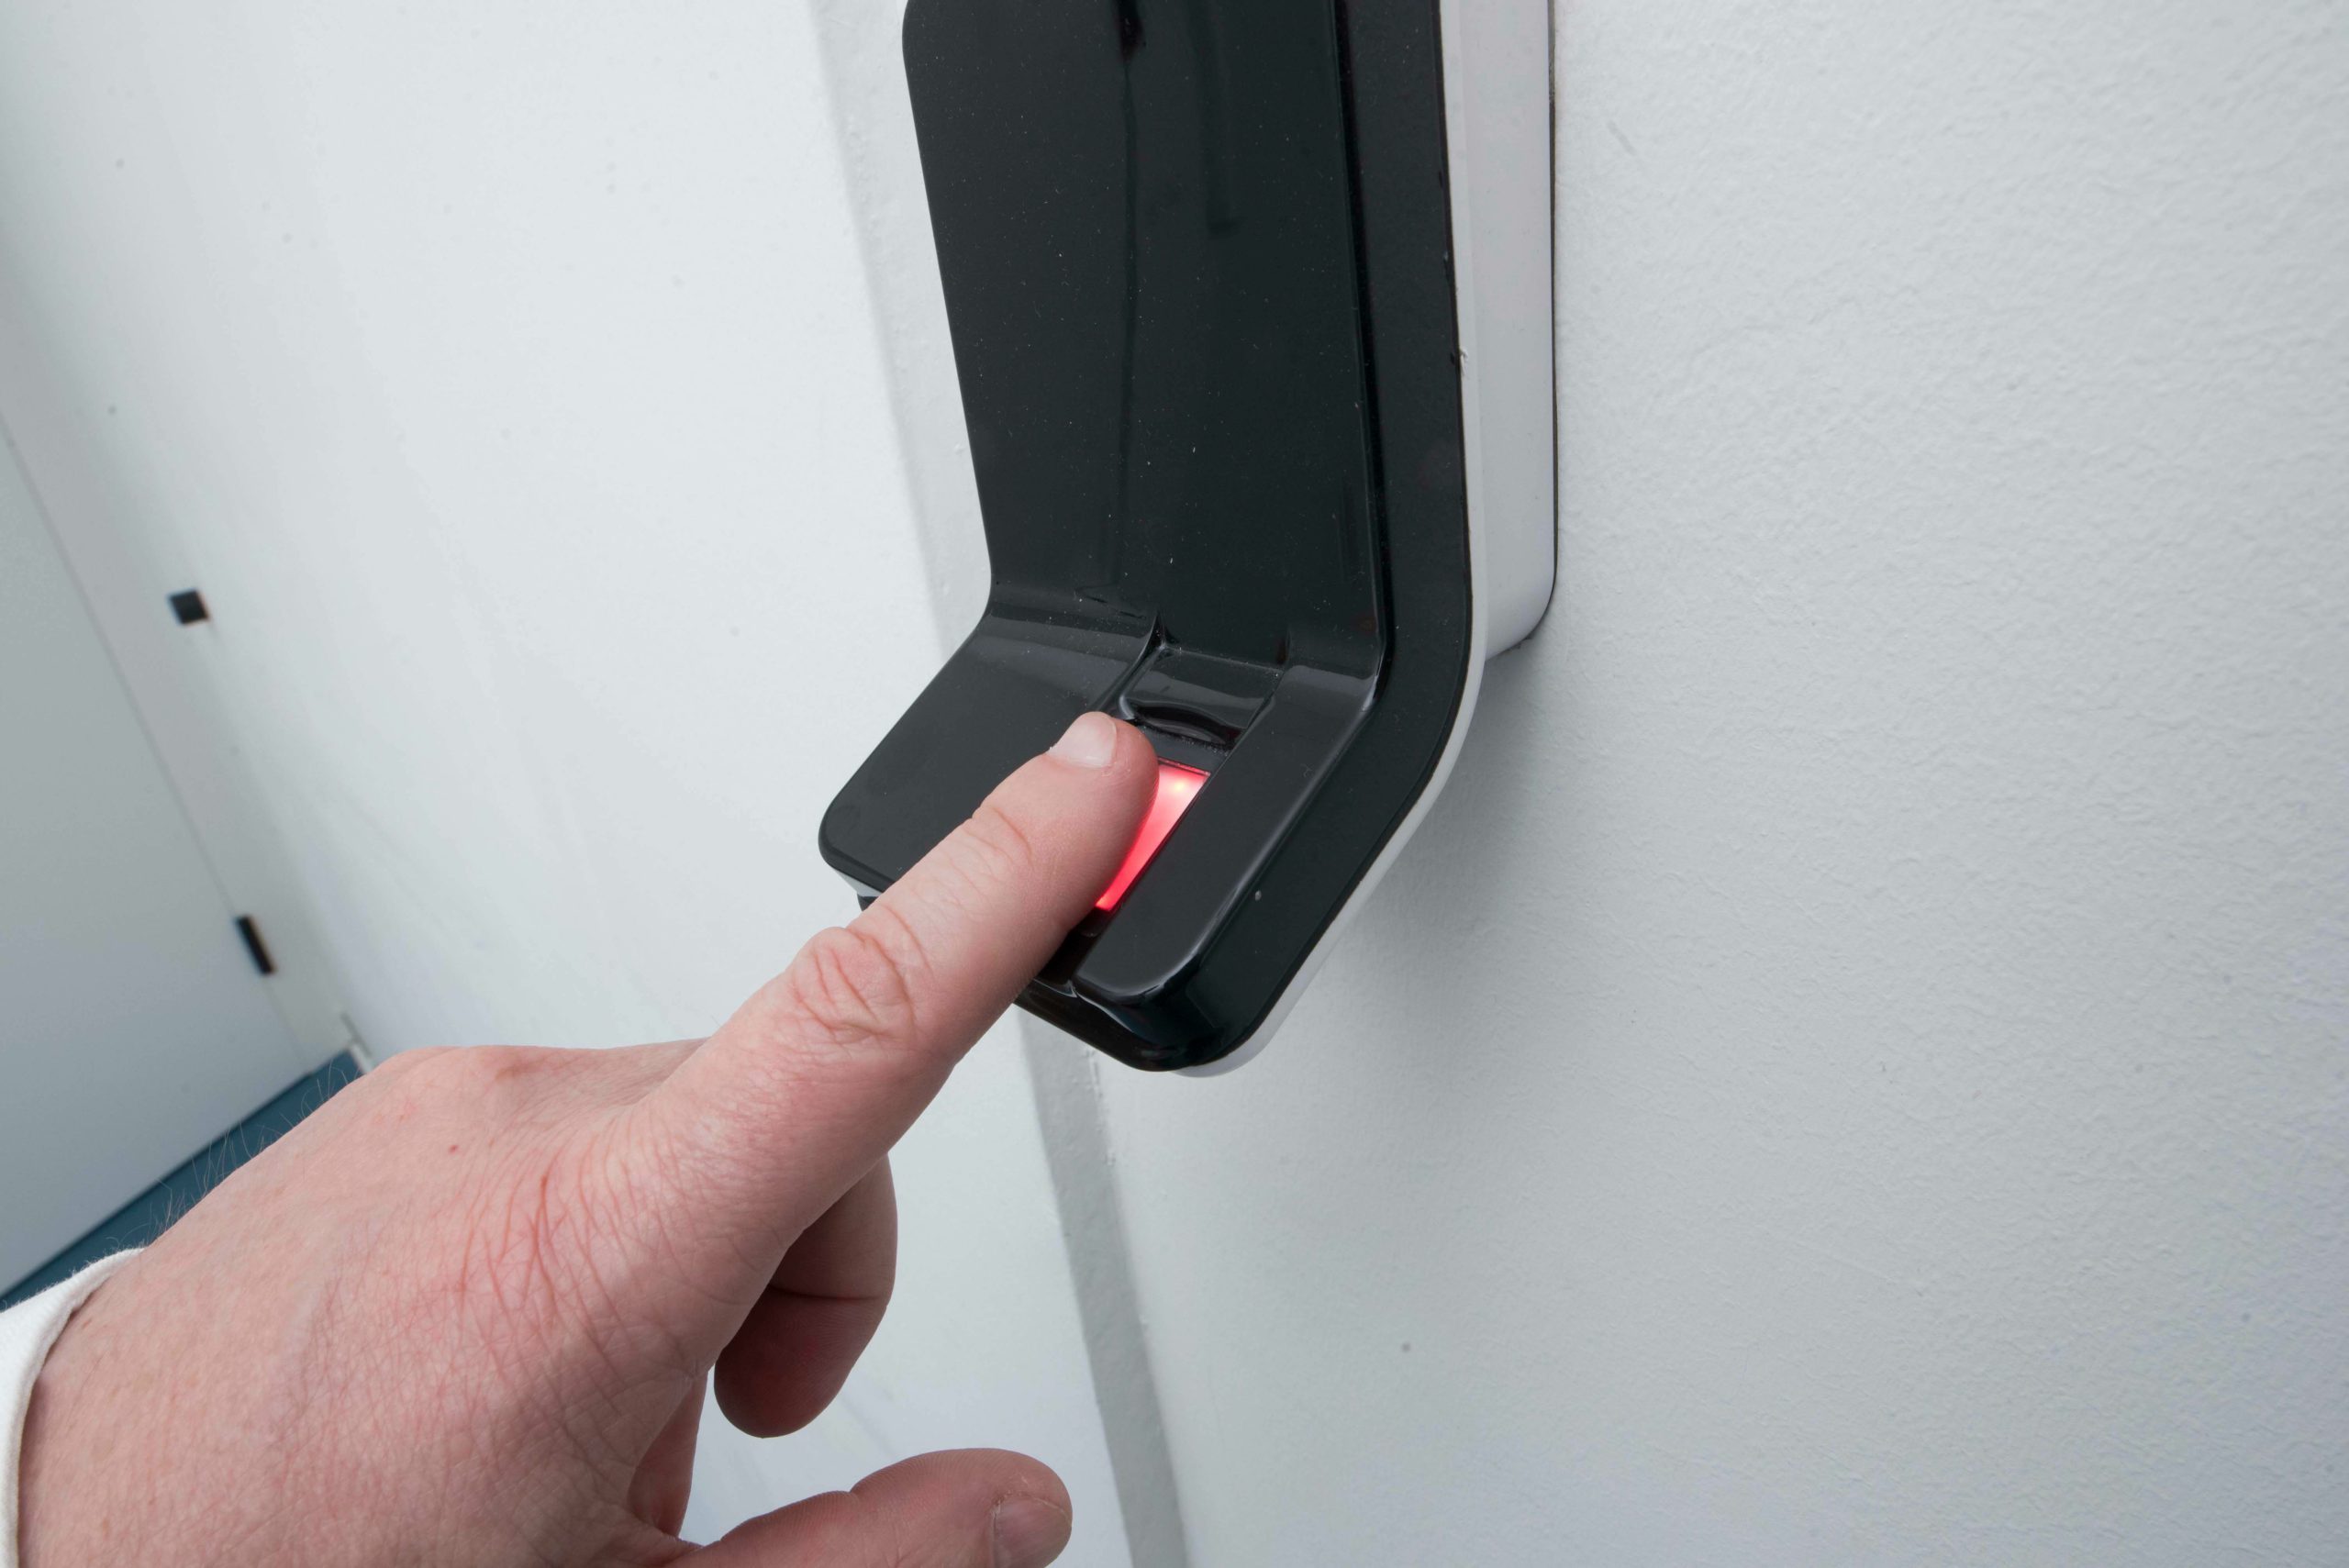 fingerprint as key for a door, electronic and biometric access system